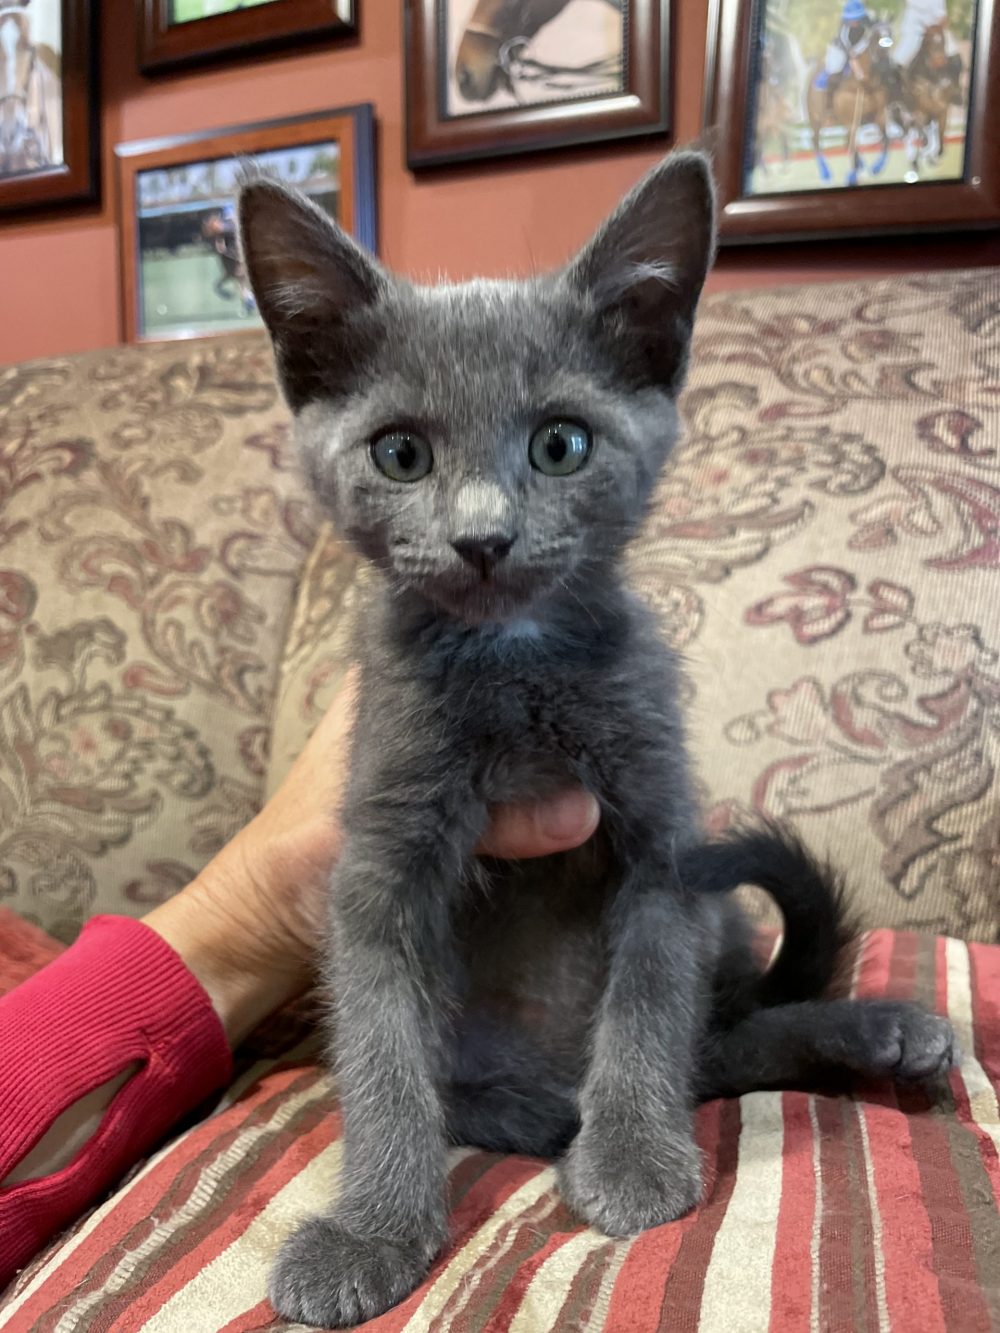 Twin to Dorothy, Toto, is a beautiful shorthair blue coat, with a little tuft of white that looks like a bow tie. He is the class clown and VERY brave and sweet. Nothing bothers him, and loves other cats and dogs too! Born: 07/17/22